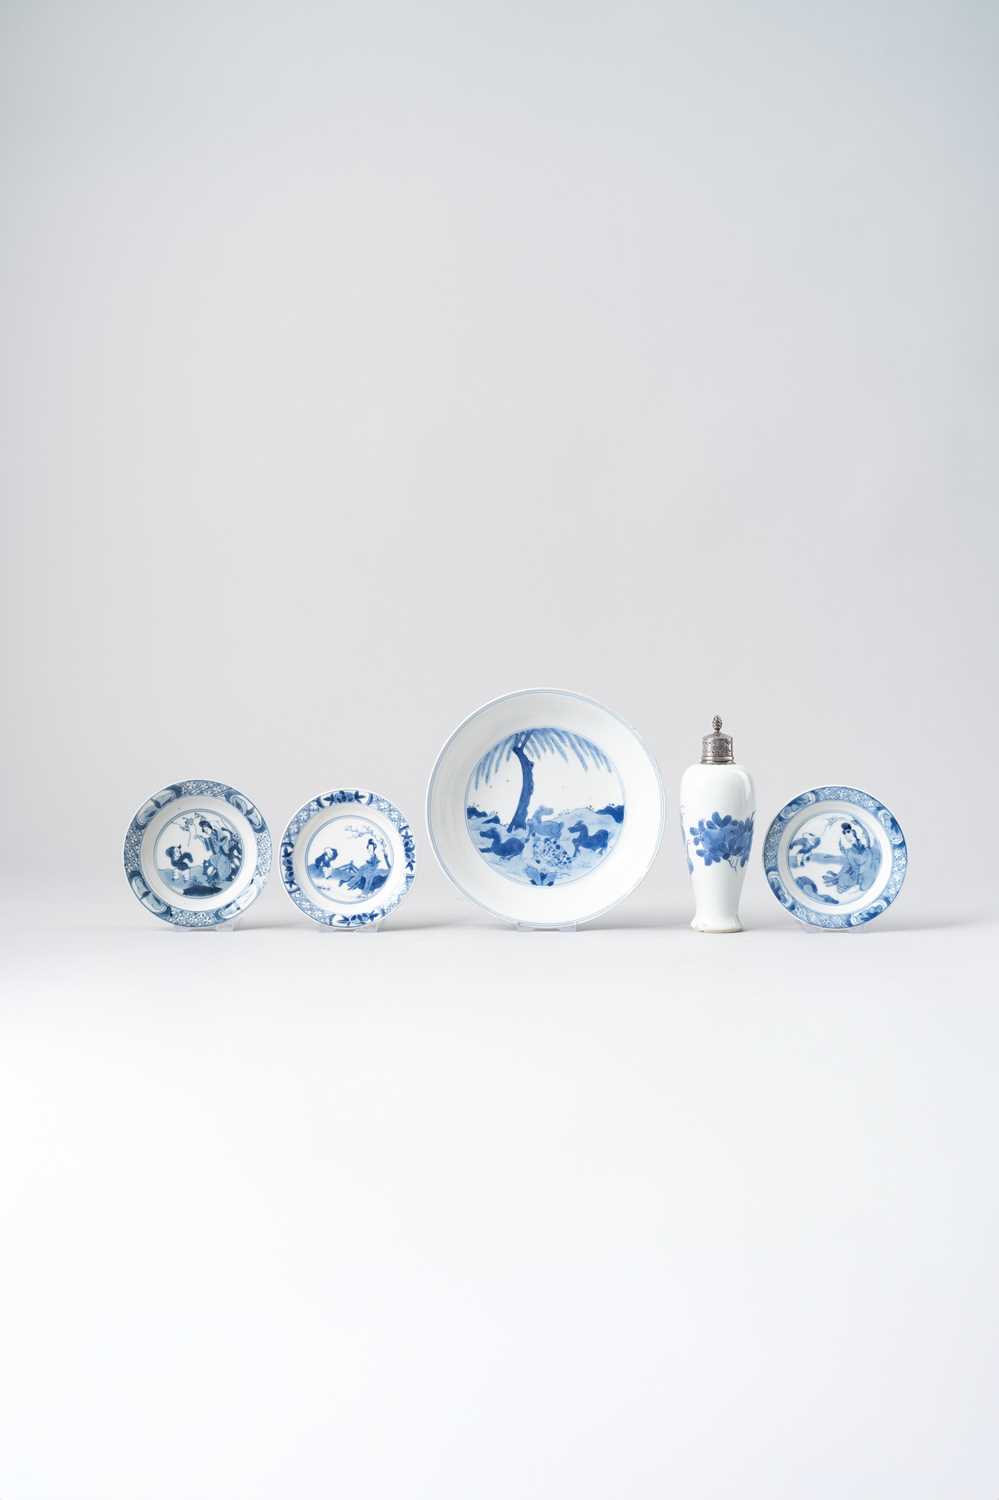 NO RESERVE A CHINESE BLUE AND WHITE 'EIGHT HORSES' DISH SIX-CHARACTER KANGXI MARK AND OF THE